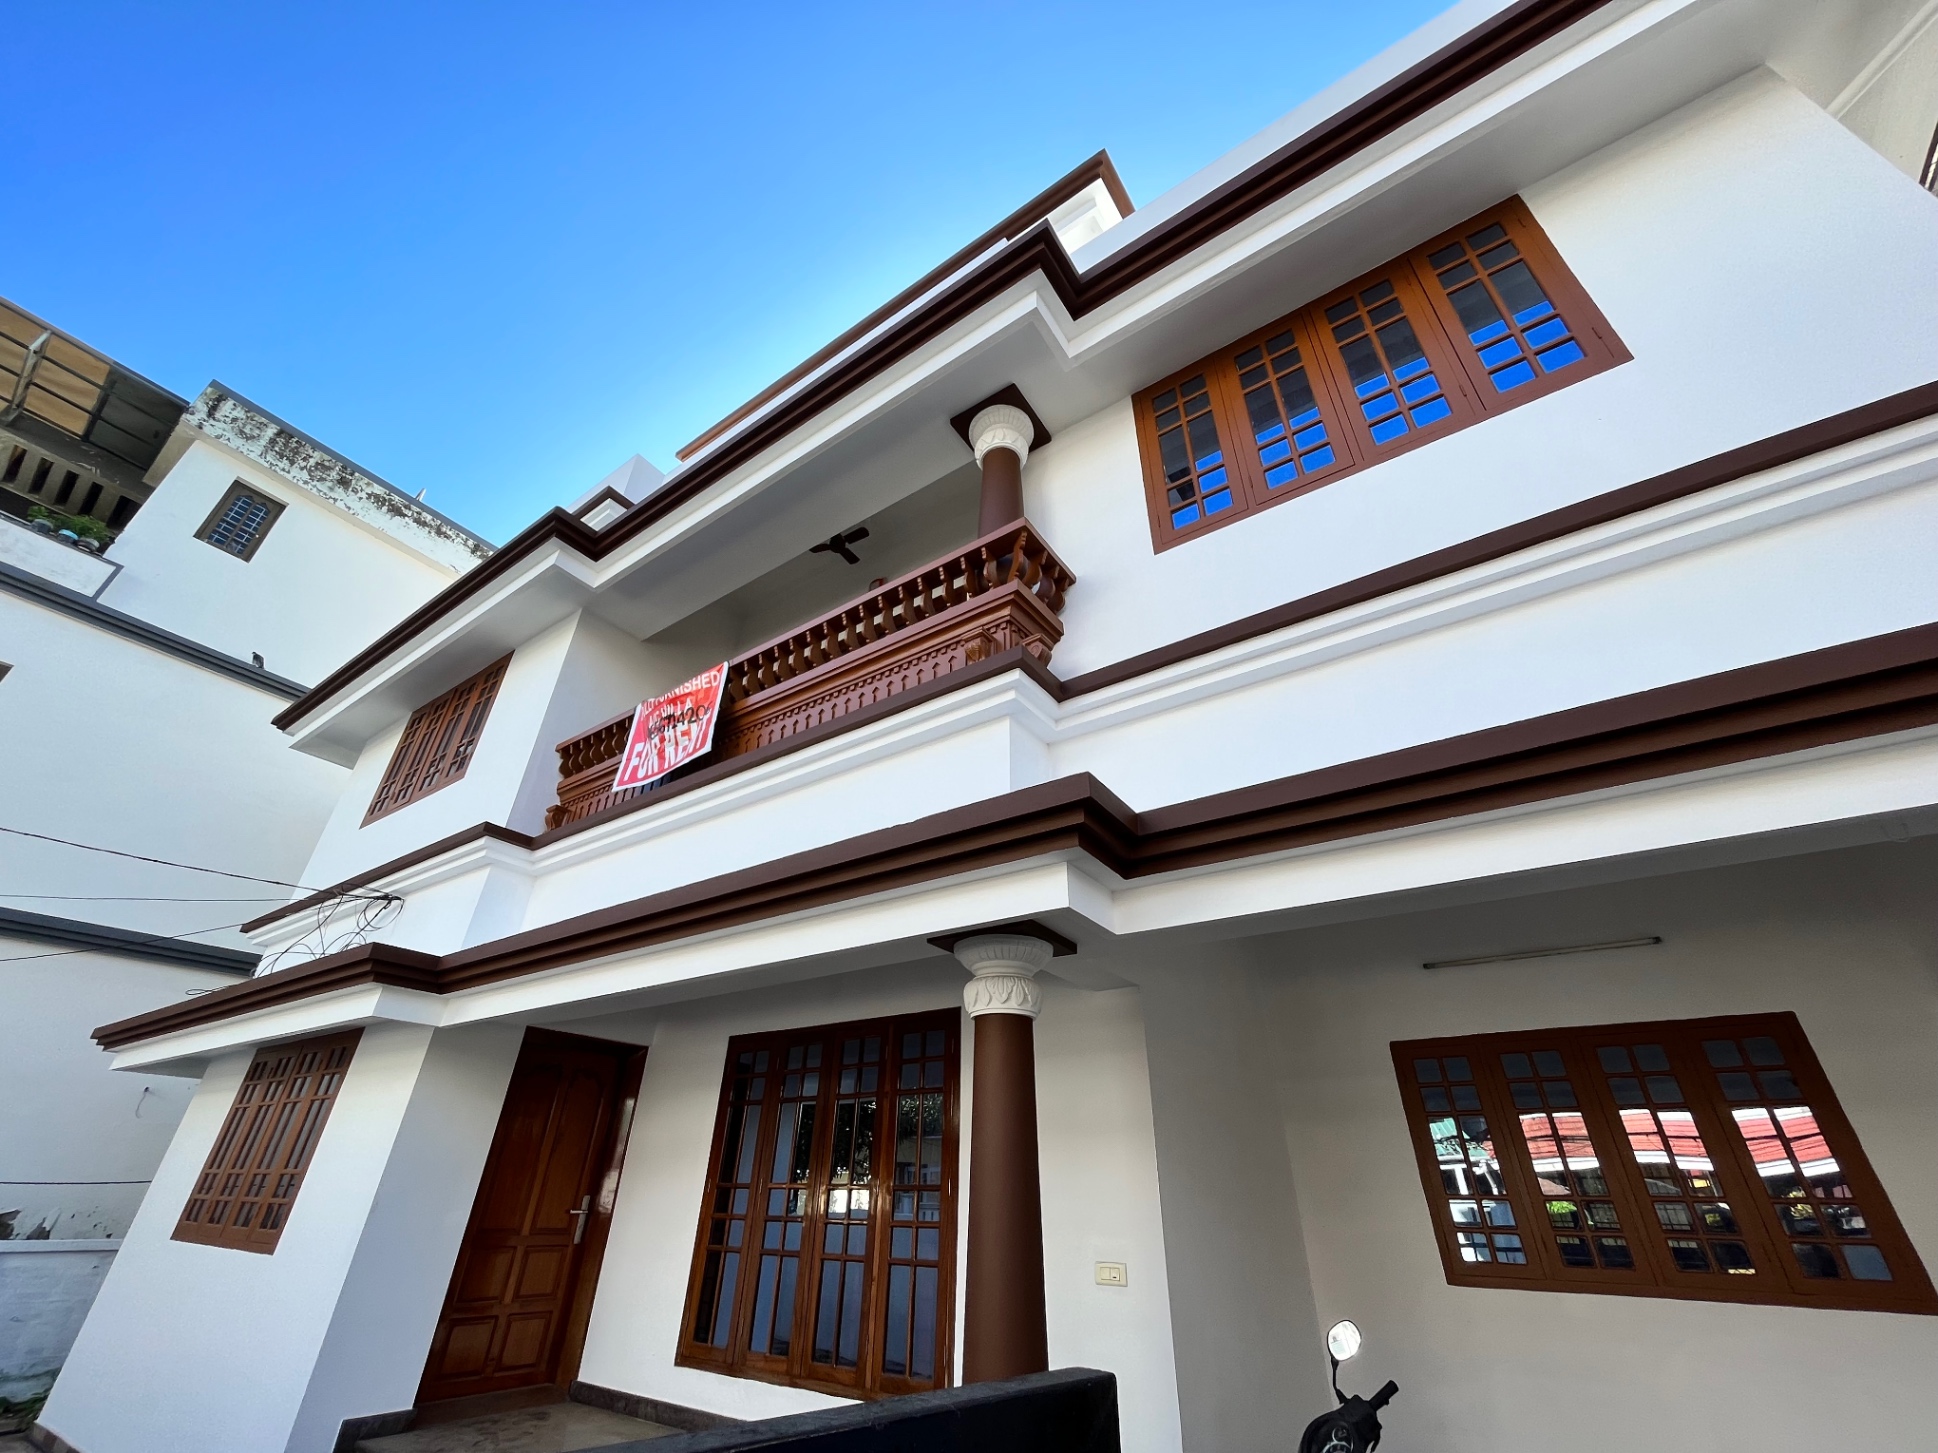 4 Bed/ 5+ Bath Rent House/ Bungalow/ Villa; 2,300 sq. ft. carpet area, Furnished for rent @Amritha nagar, edappally